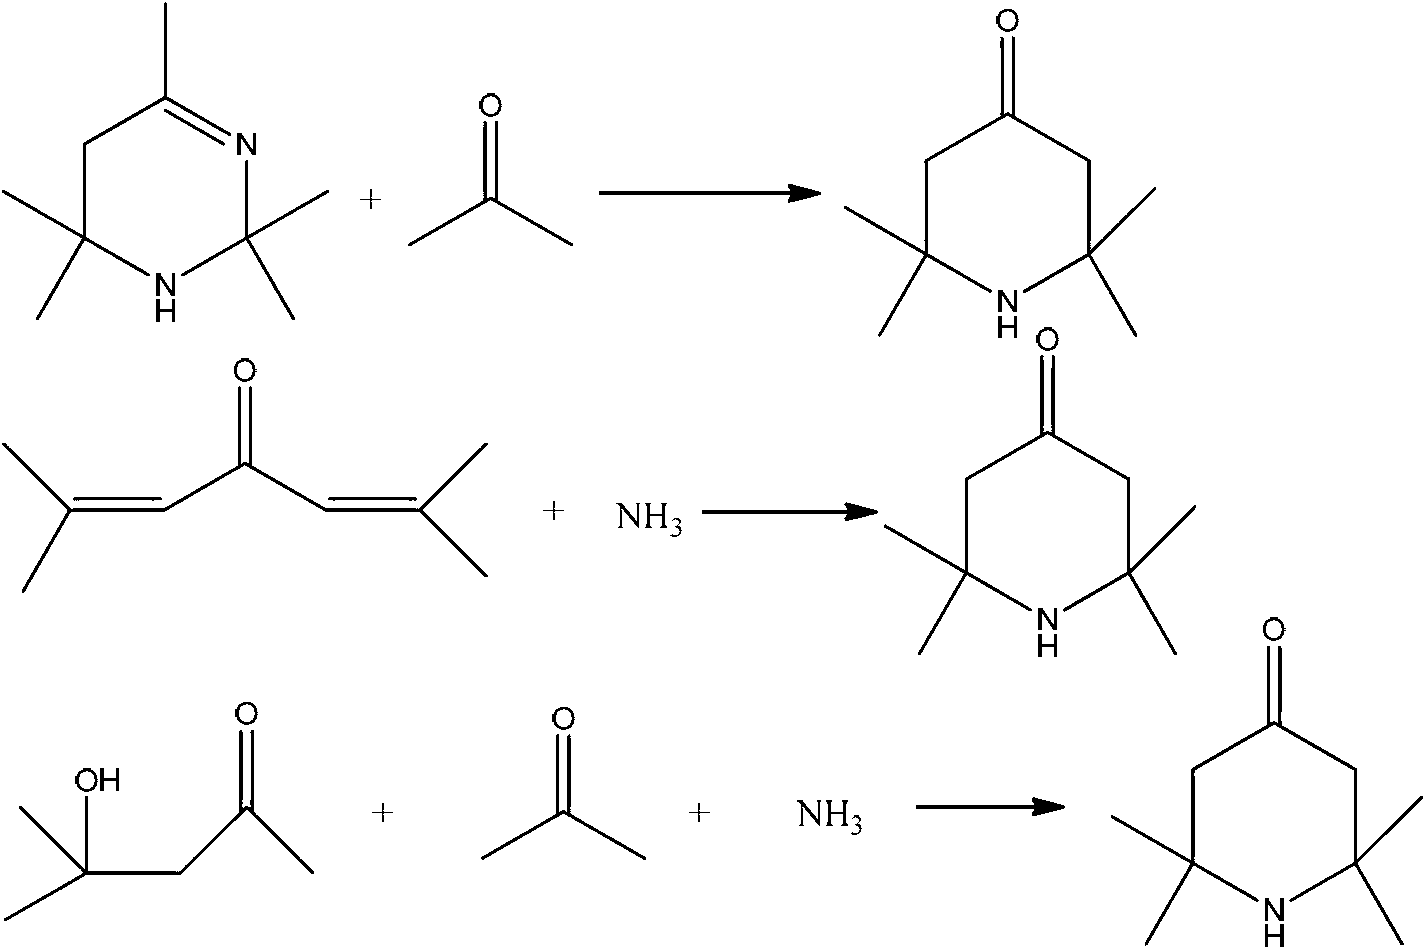 2,2,6,6,-tetramethyl-4-piperidone continuous synthesis method